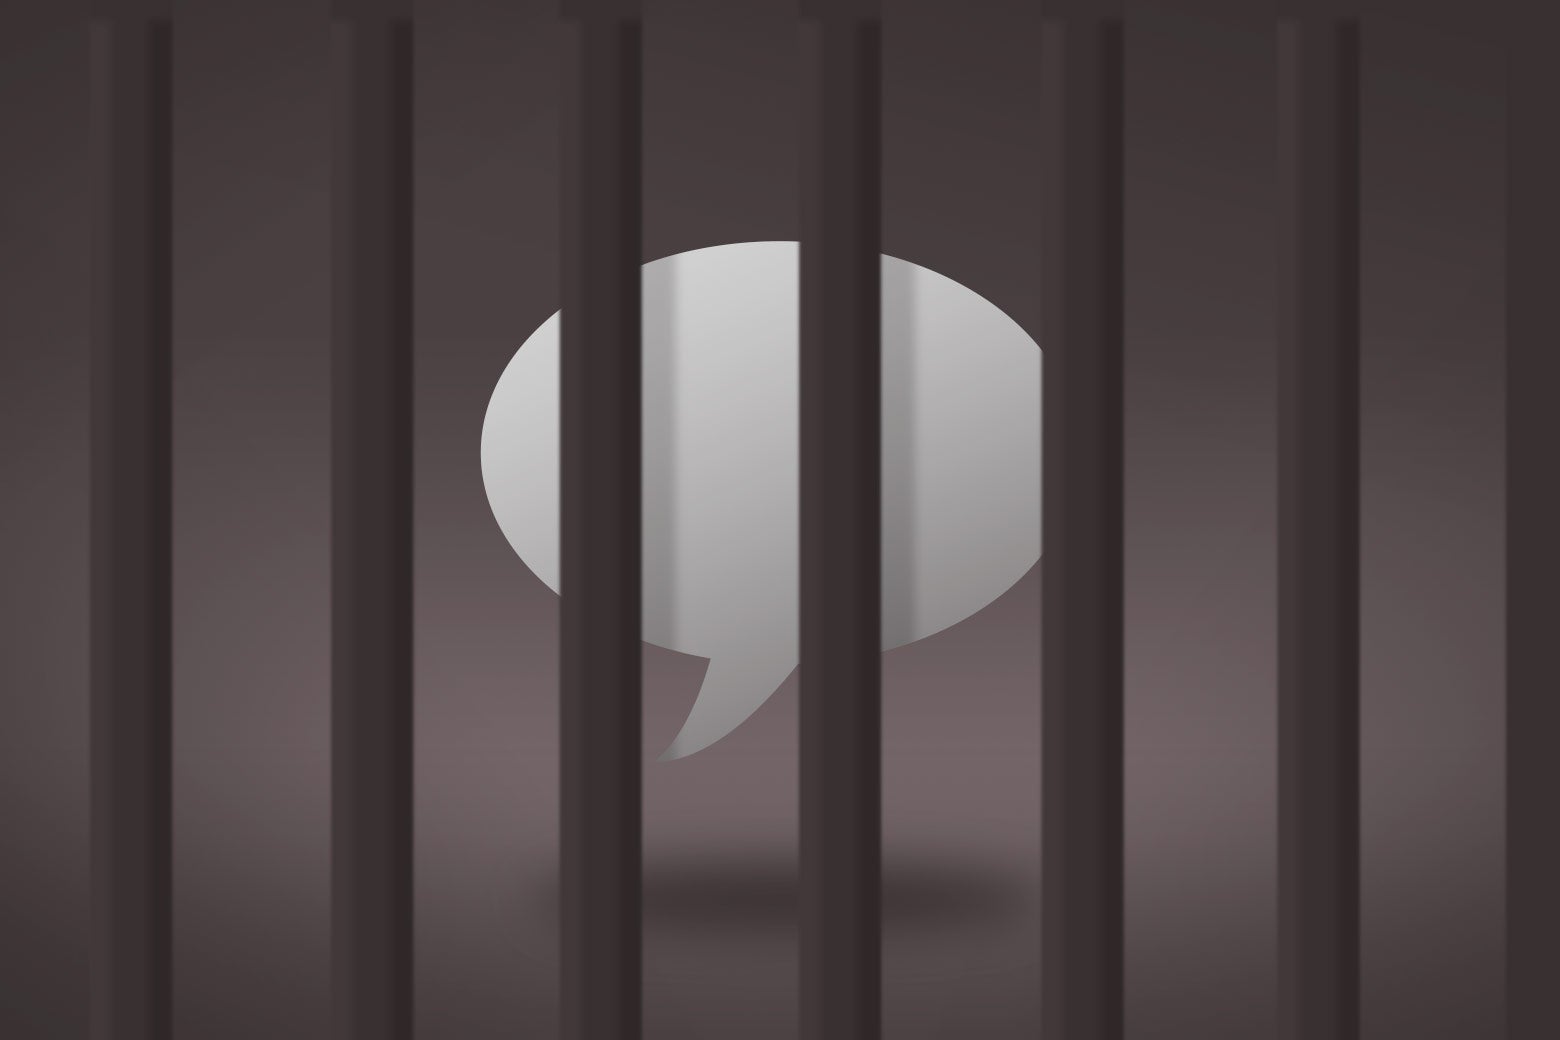 A white messaging app icon behind black prison bars. 